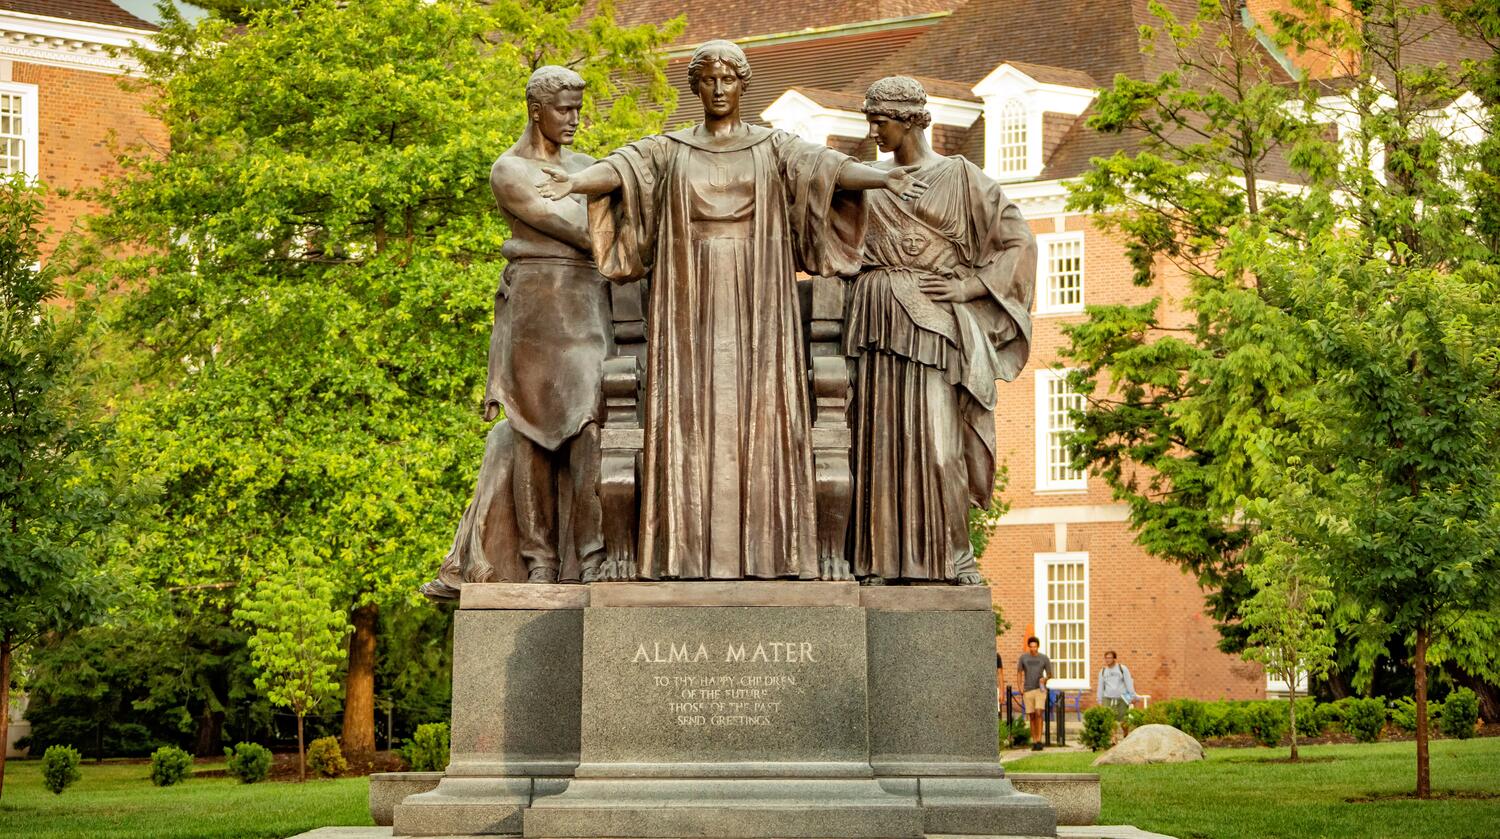 Photo of the Alma Mater Statue on campus during the summer with green trees and nearby brick buildings in the background